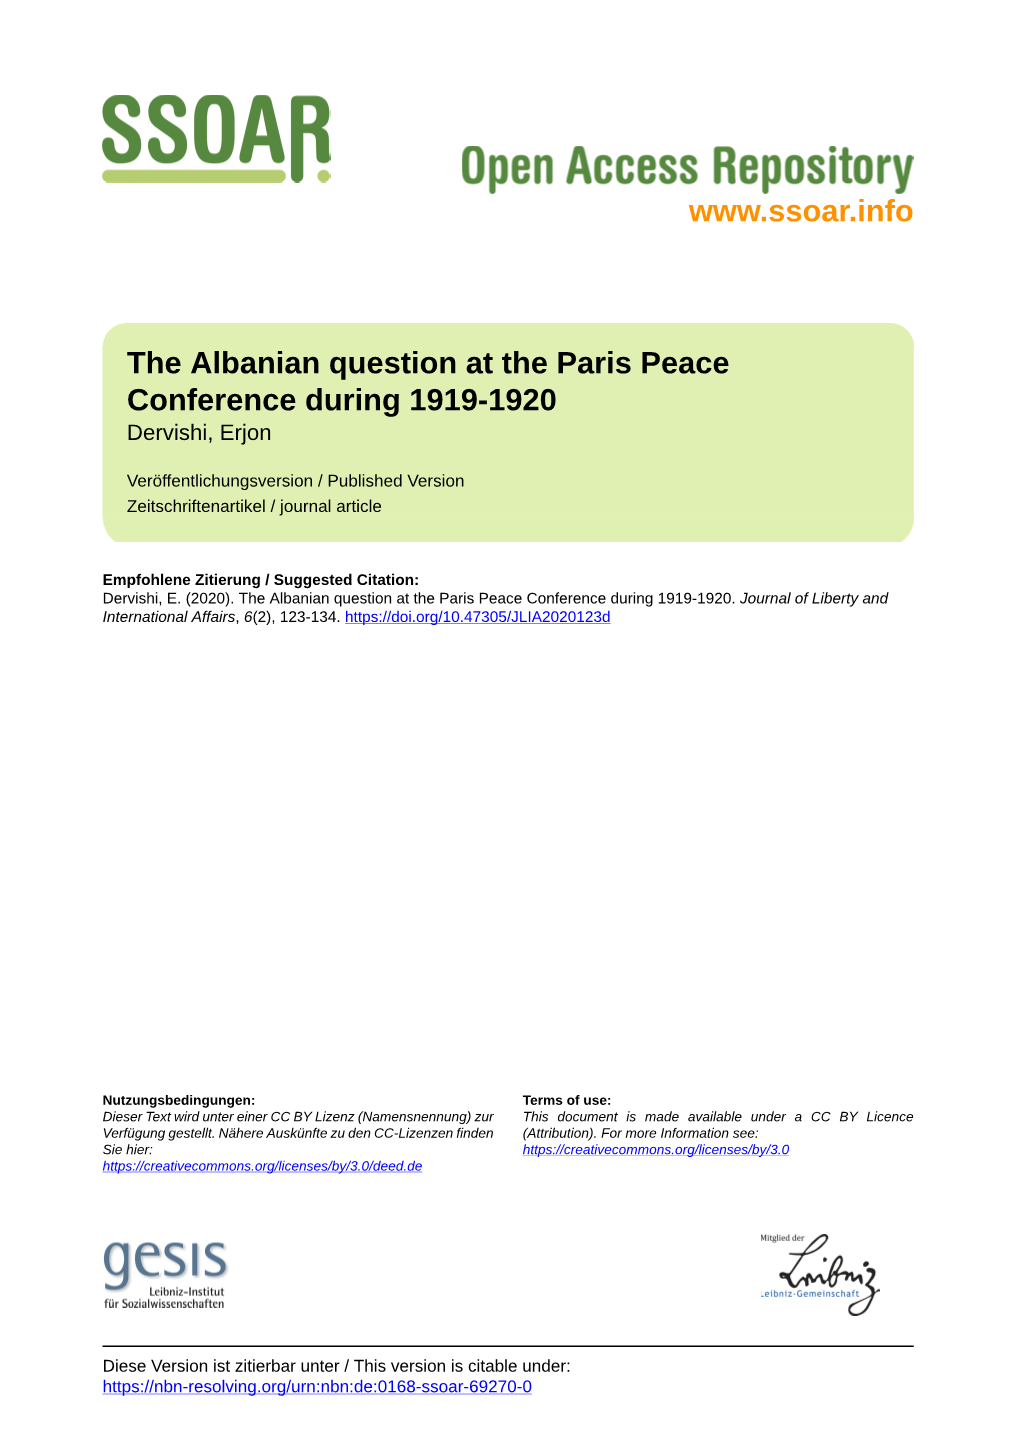 The Albanian Question at the Paris Peace Conference During 1919-1920 Dervishi, Erjon